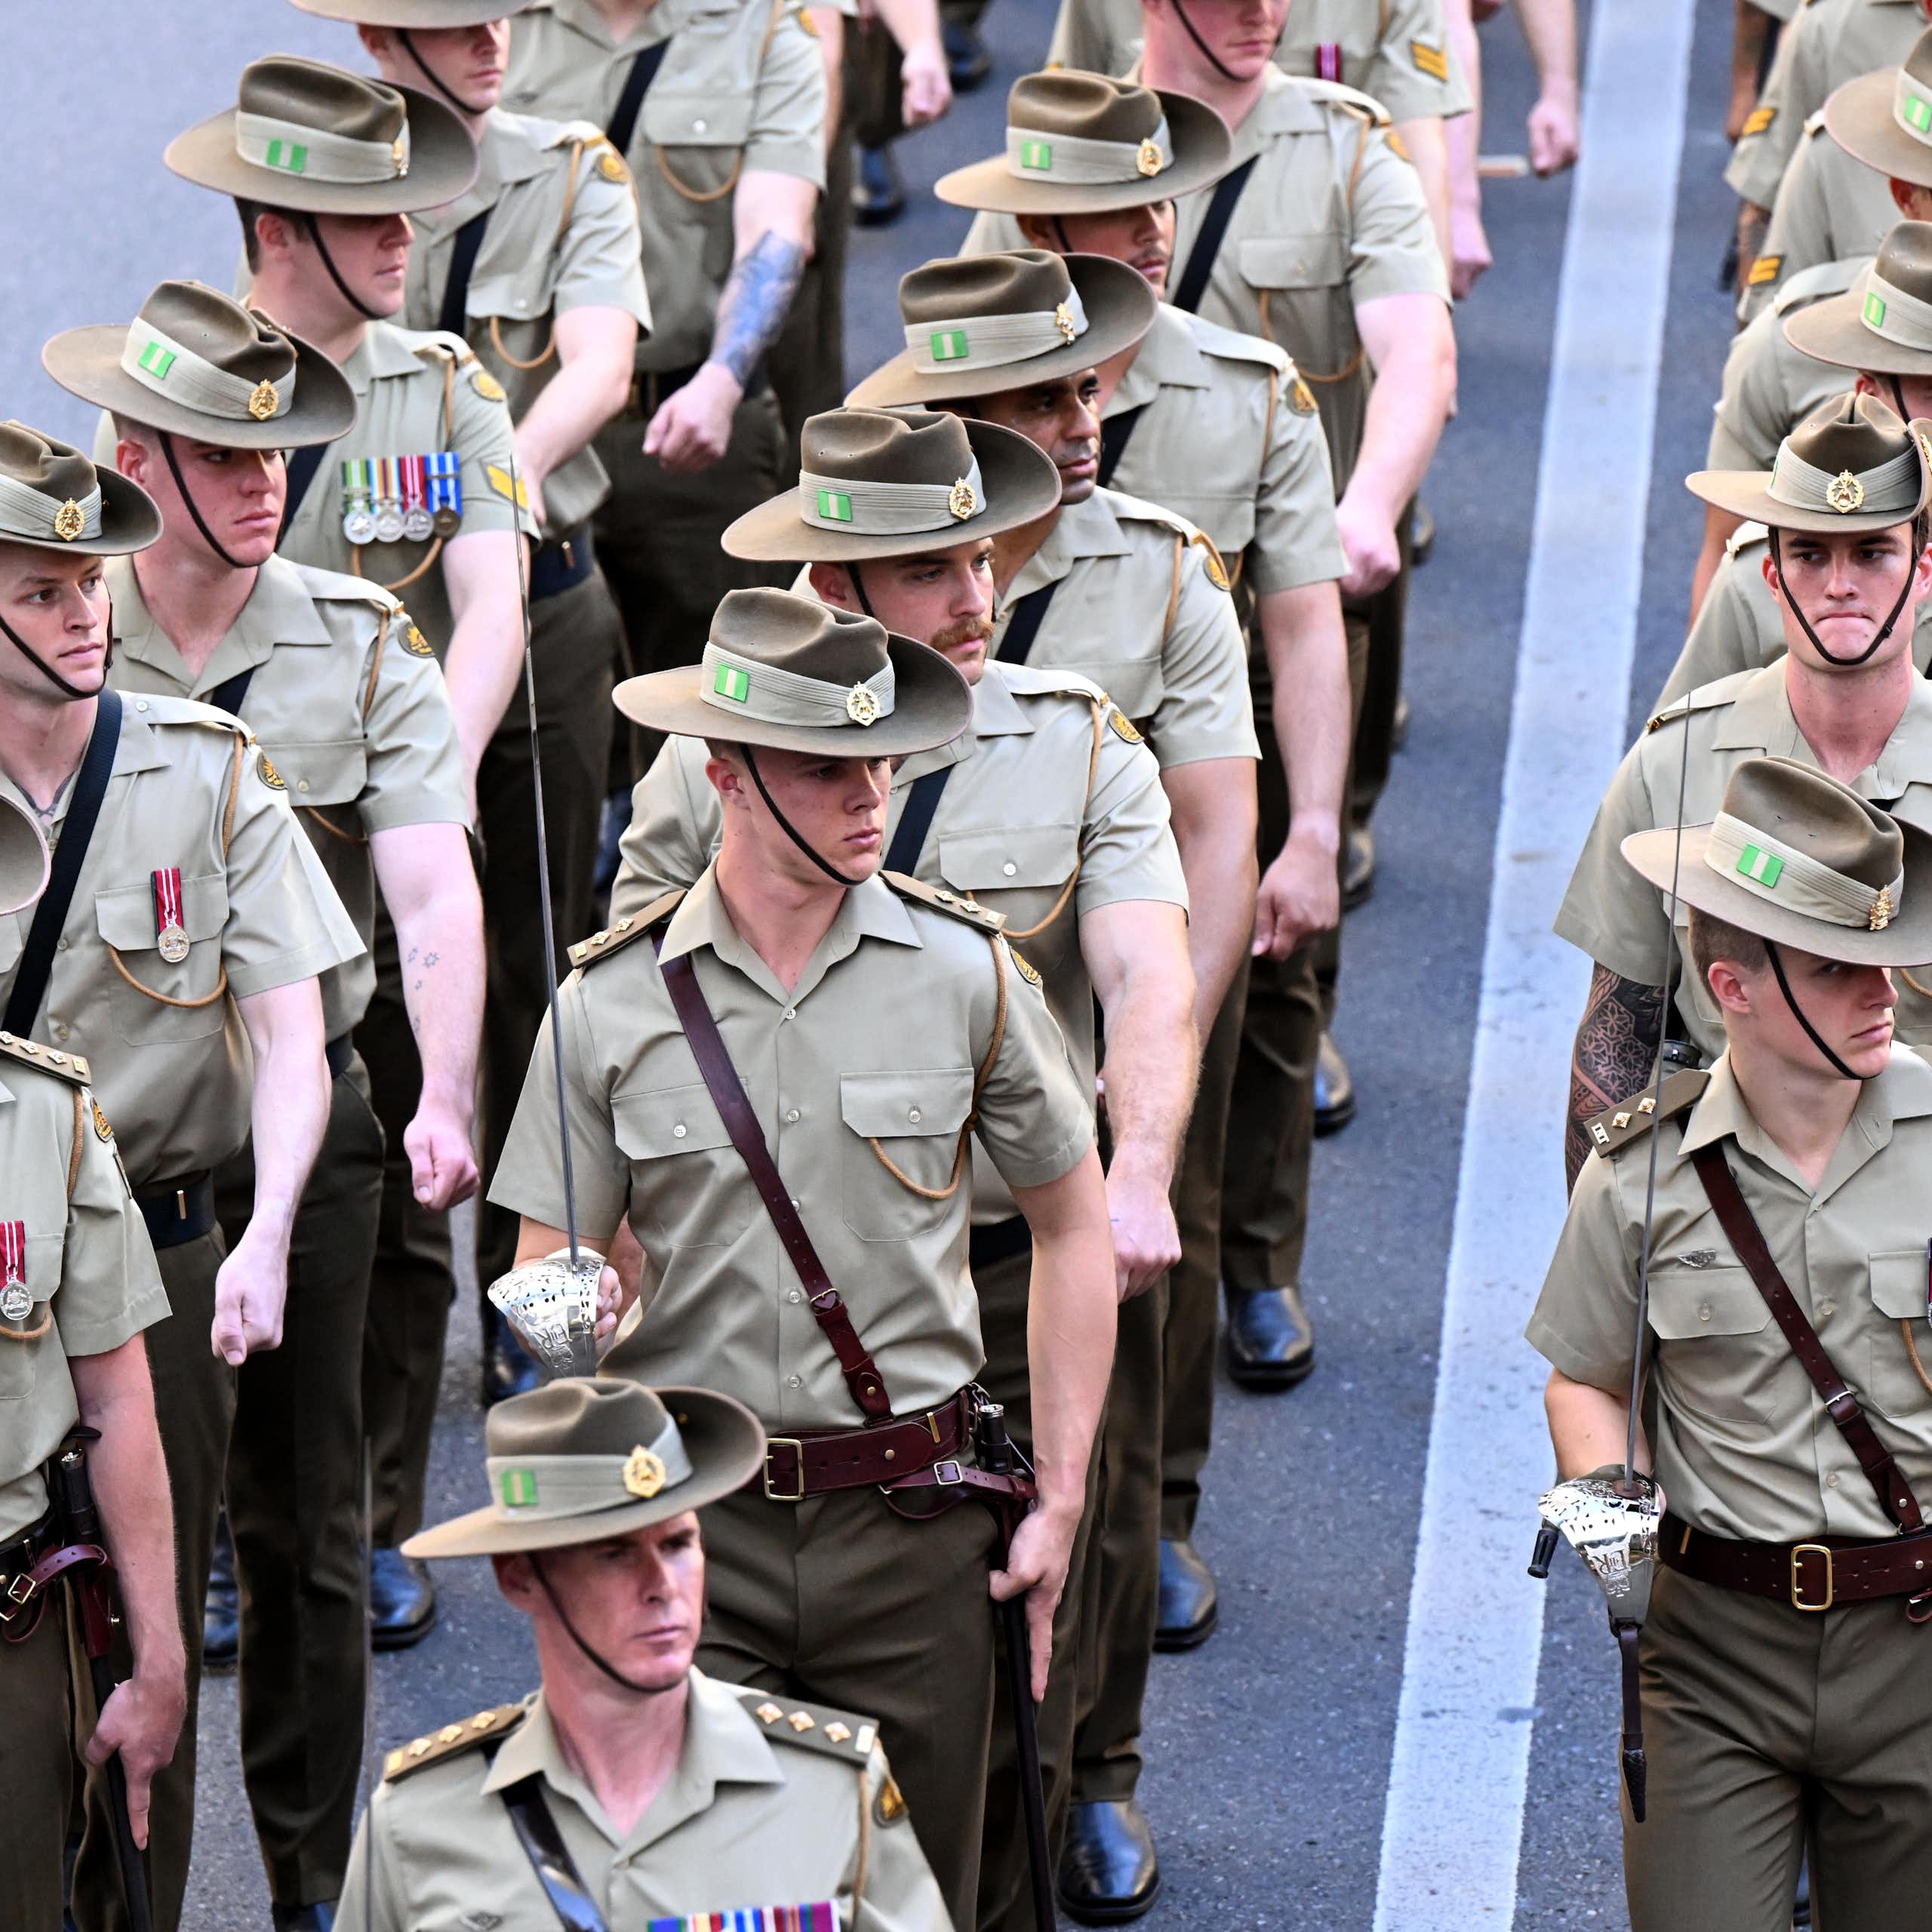 Gen Z is turning away from military service in record numbers. We’re trying to understand why